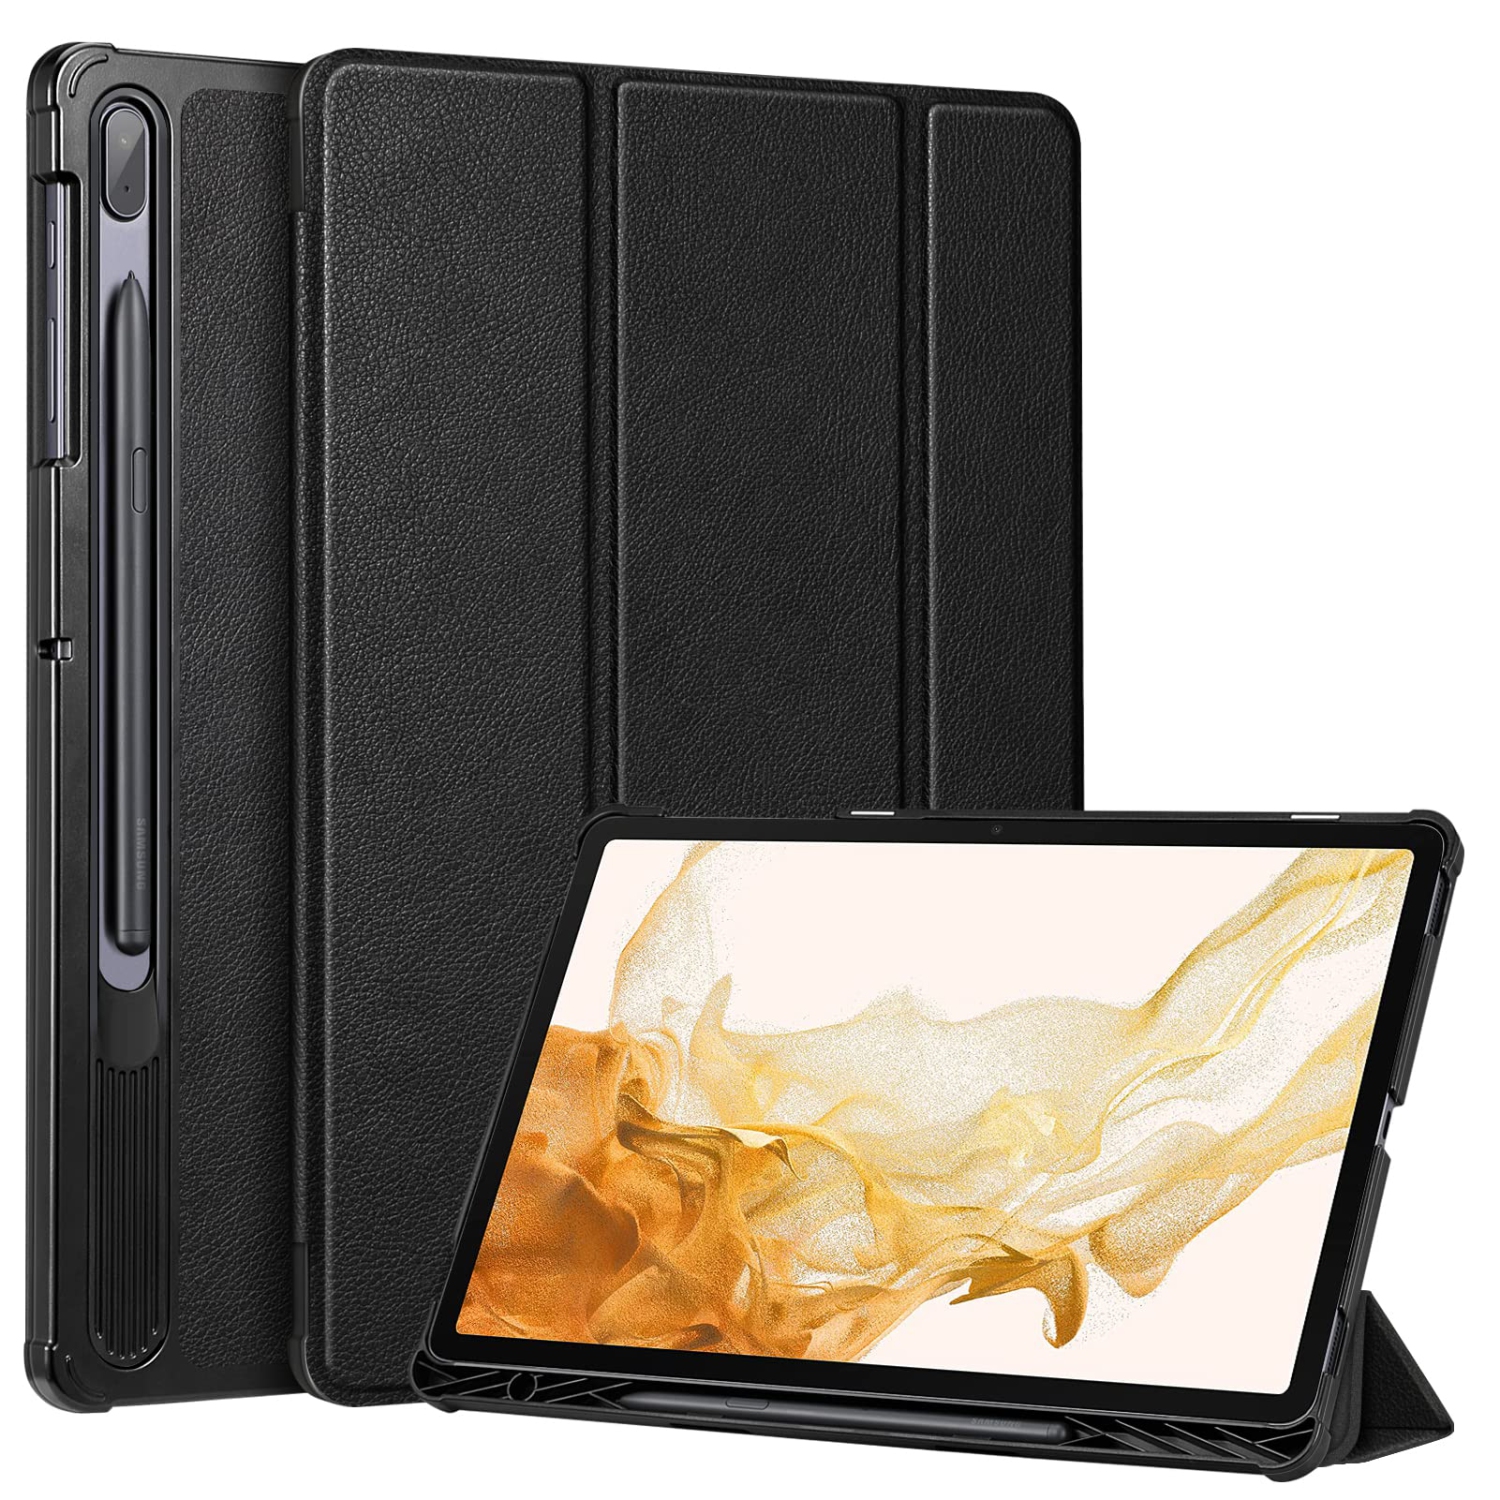 Slim Case for Samsung Galaxy Tab S8 Plus 2022/S7 FE 2021/S7 Plus 2020 12.4 inch with S Pen Holder, Ultra Thin Lightweight Tri-Fold Stand Cover Auto Wake/Sleep, Black